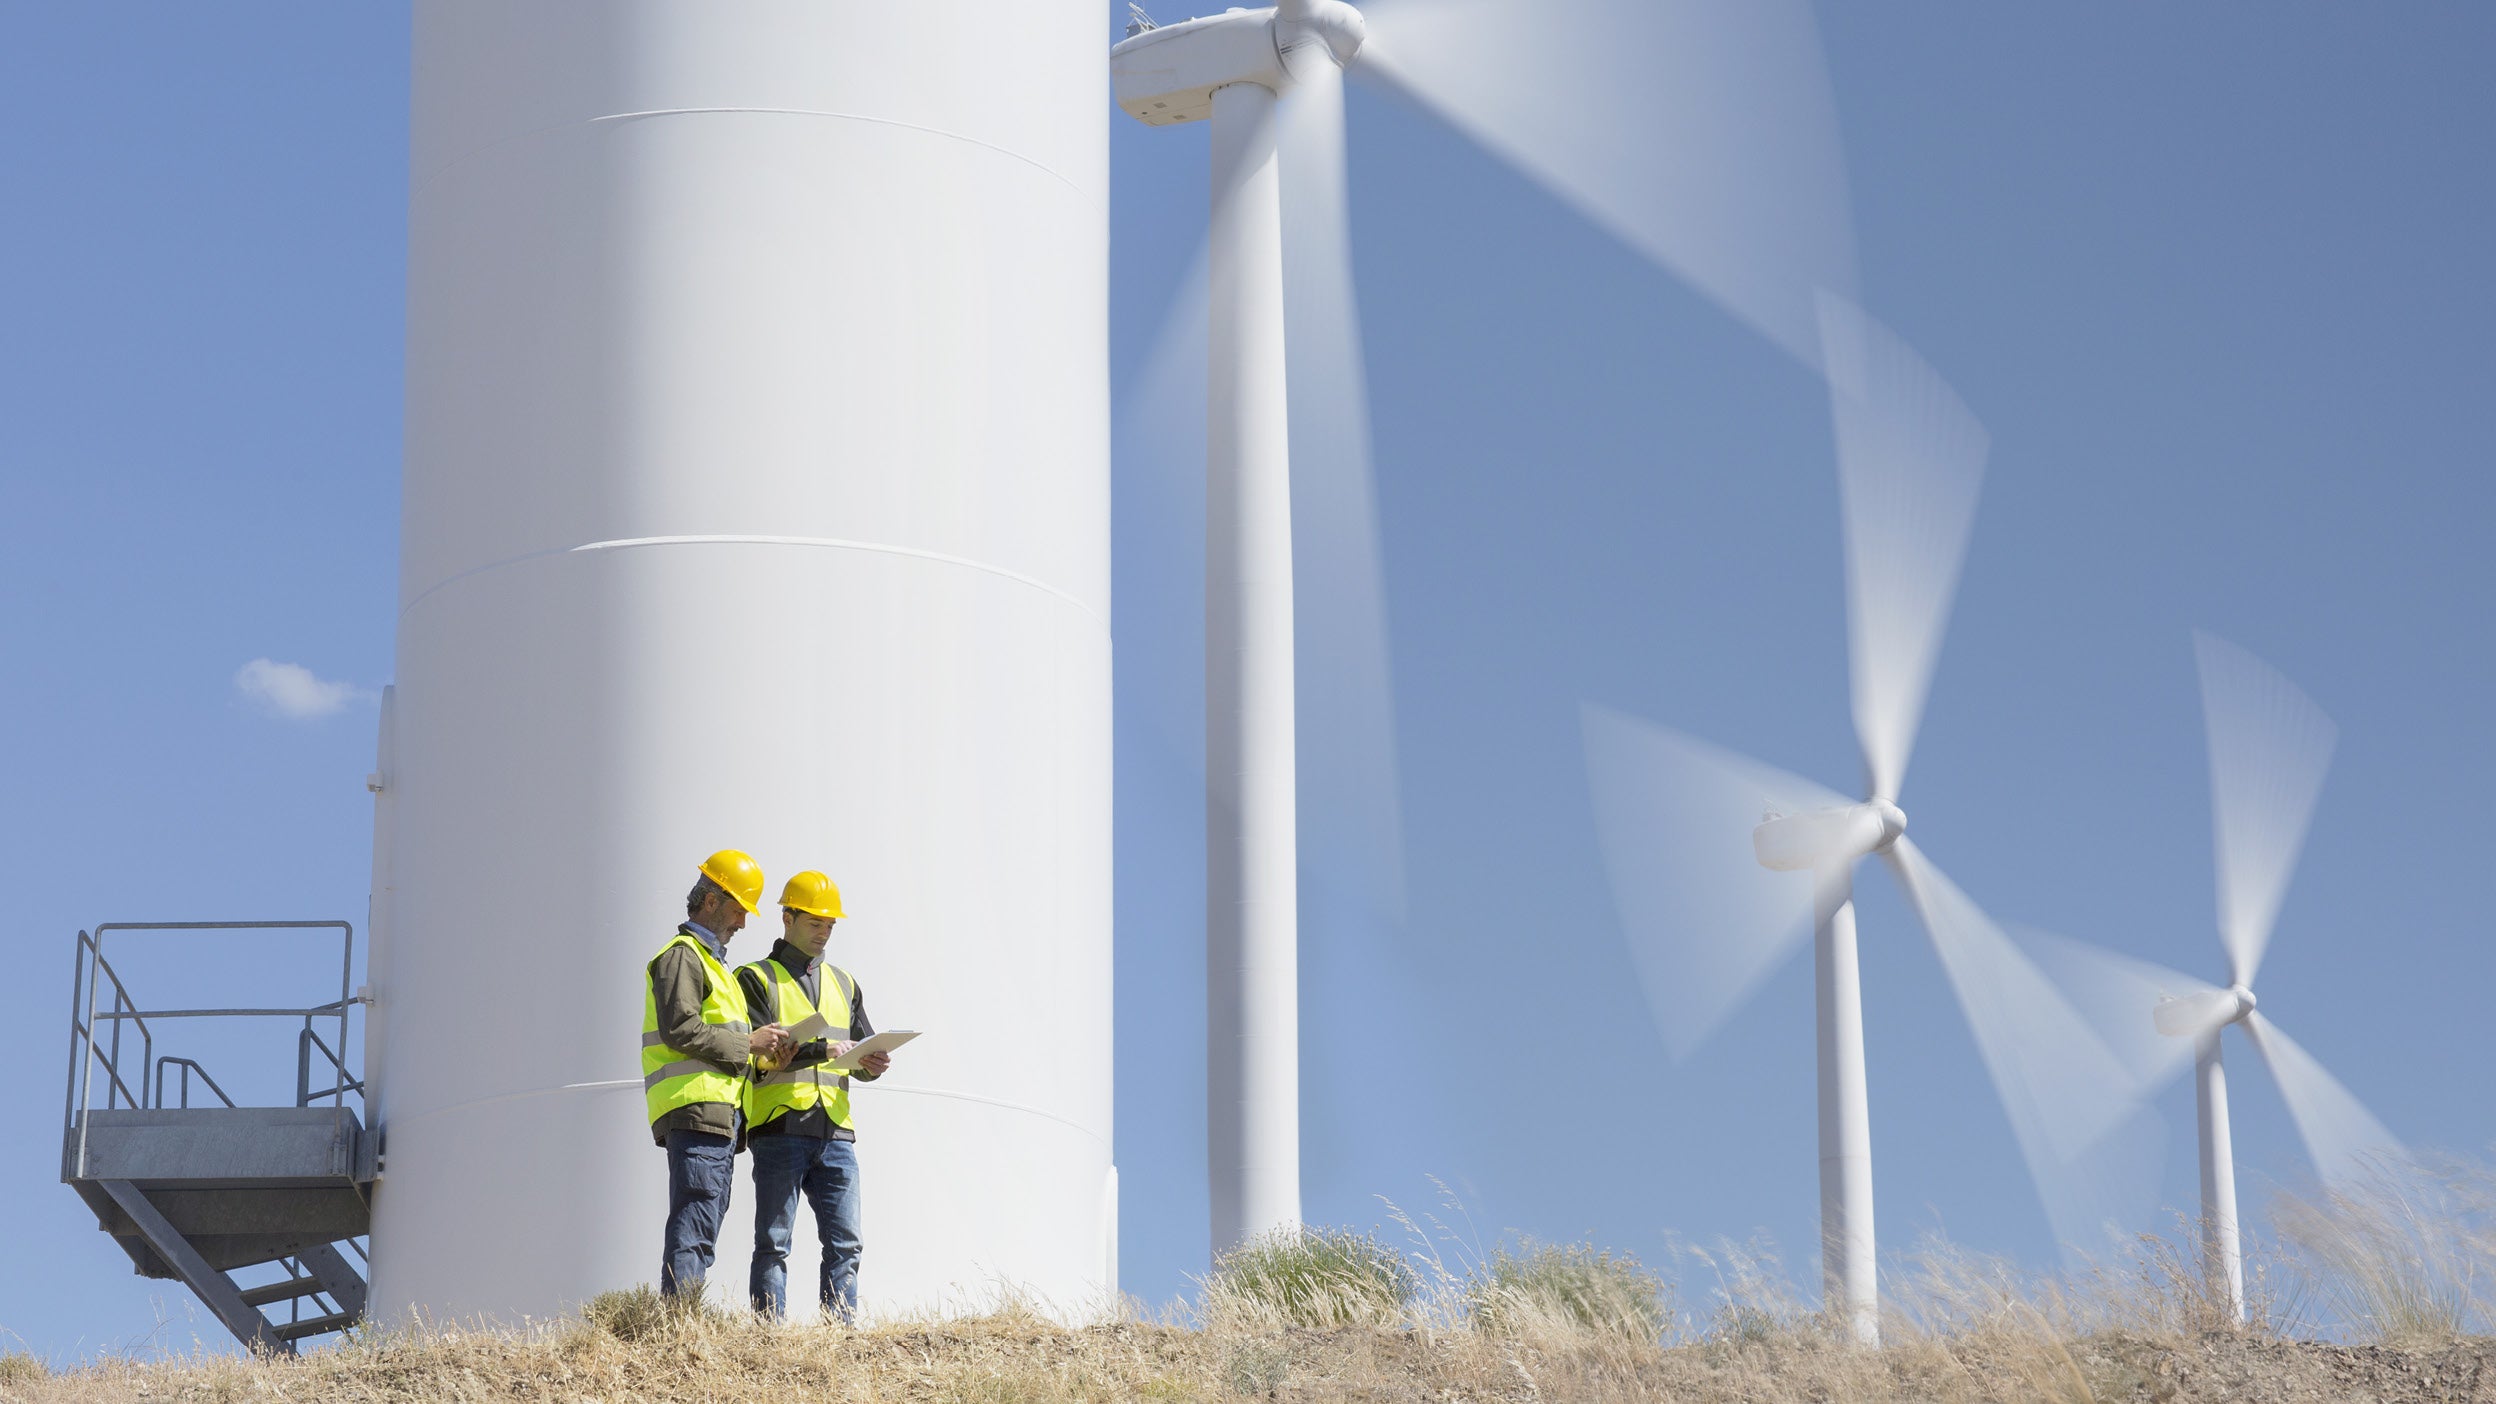 Two men stand in front of wind turbines